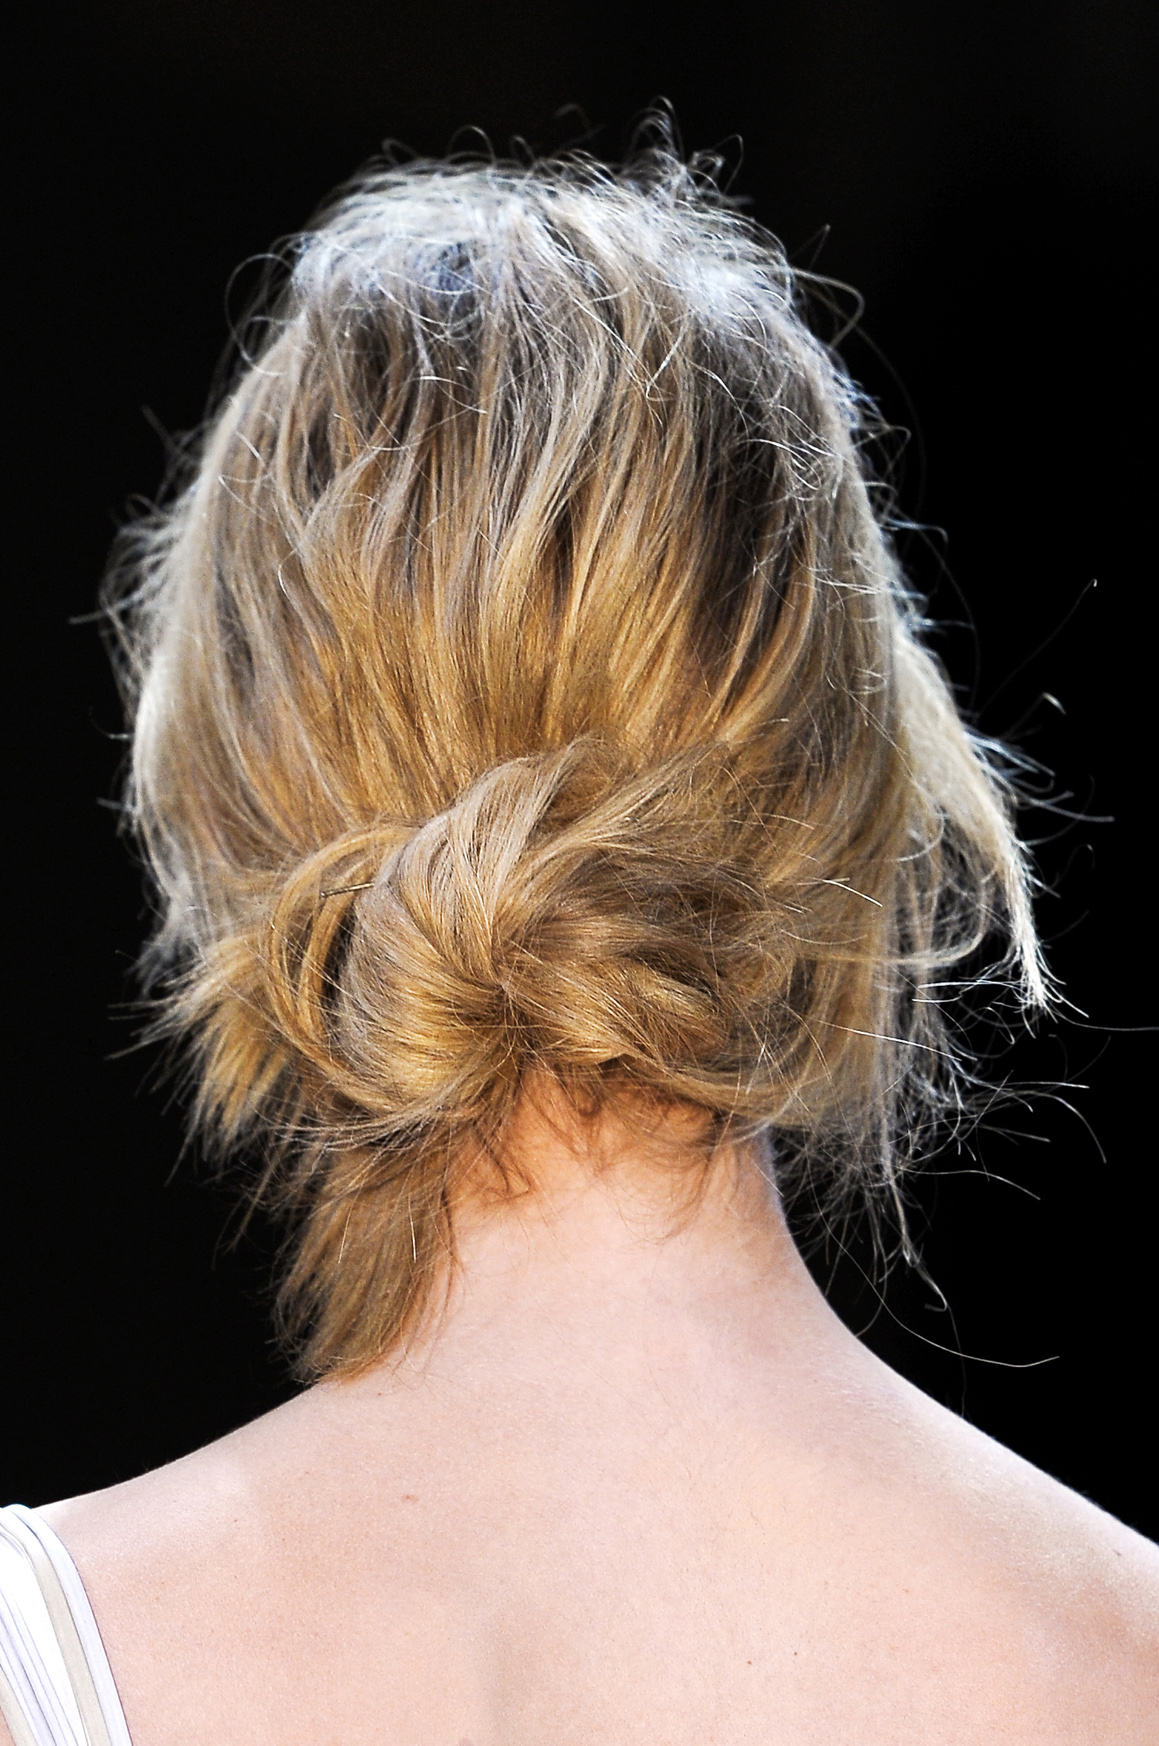 Messy Bun How To: Getting the Look Just Right | StyleCaster